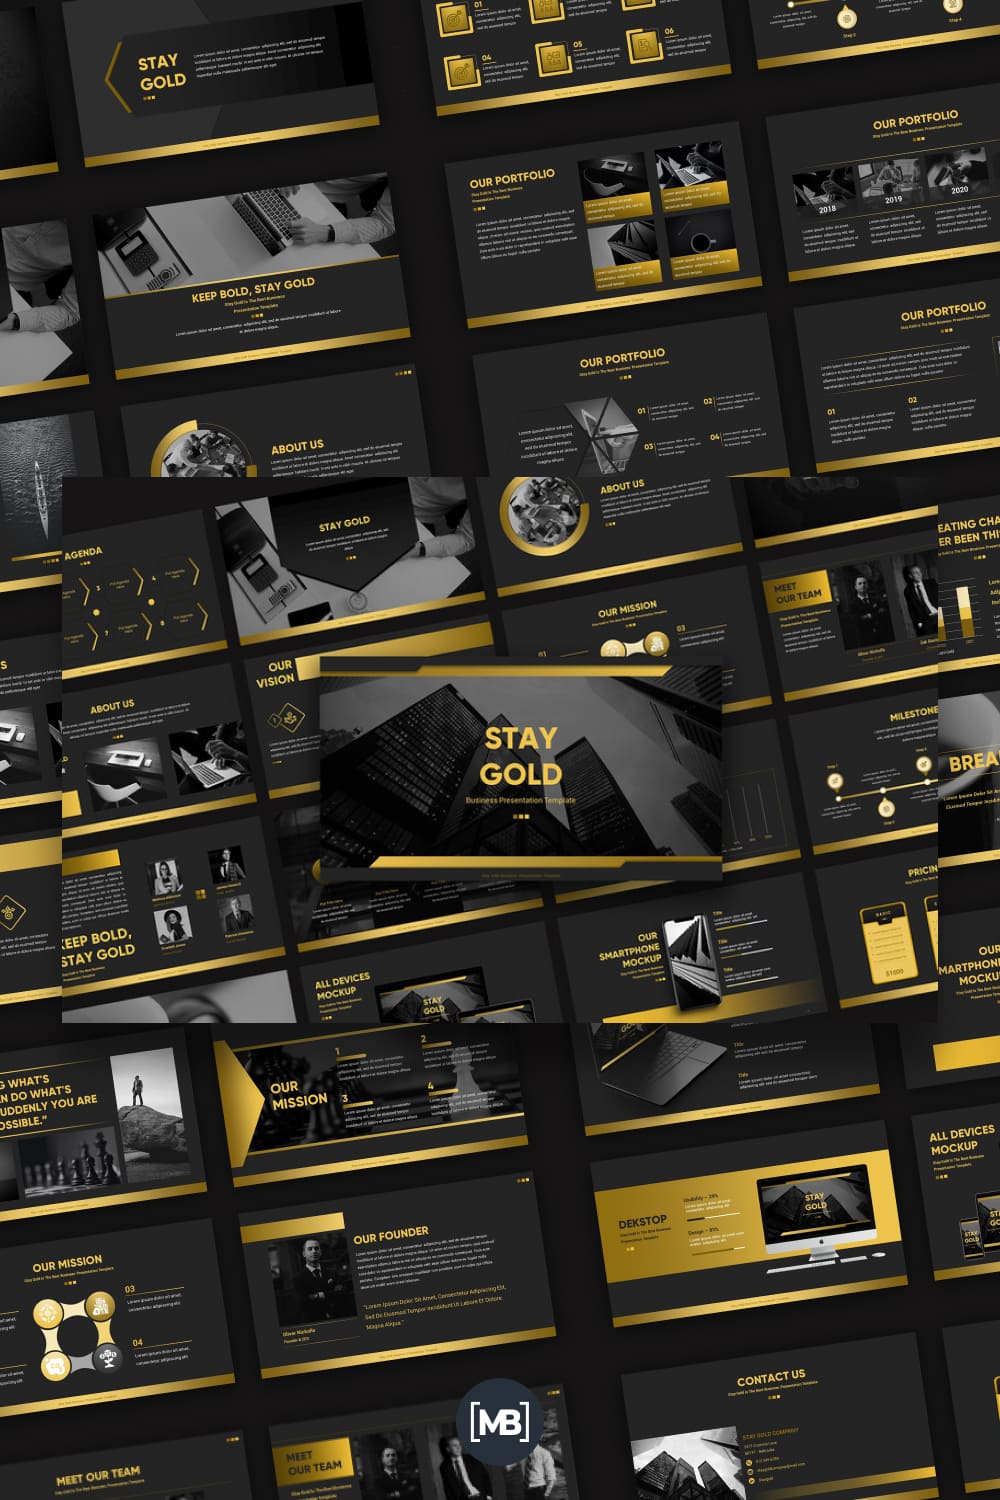 Stay gold business presentation powerpoint template.